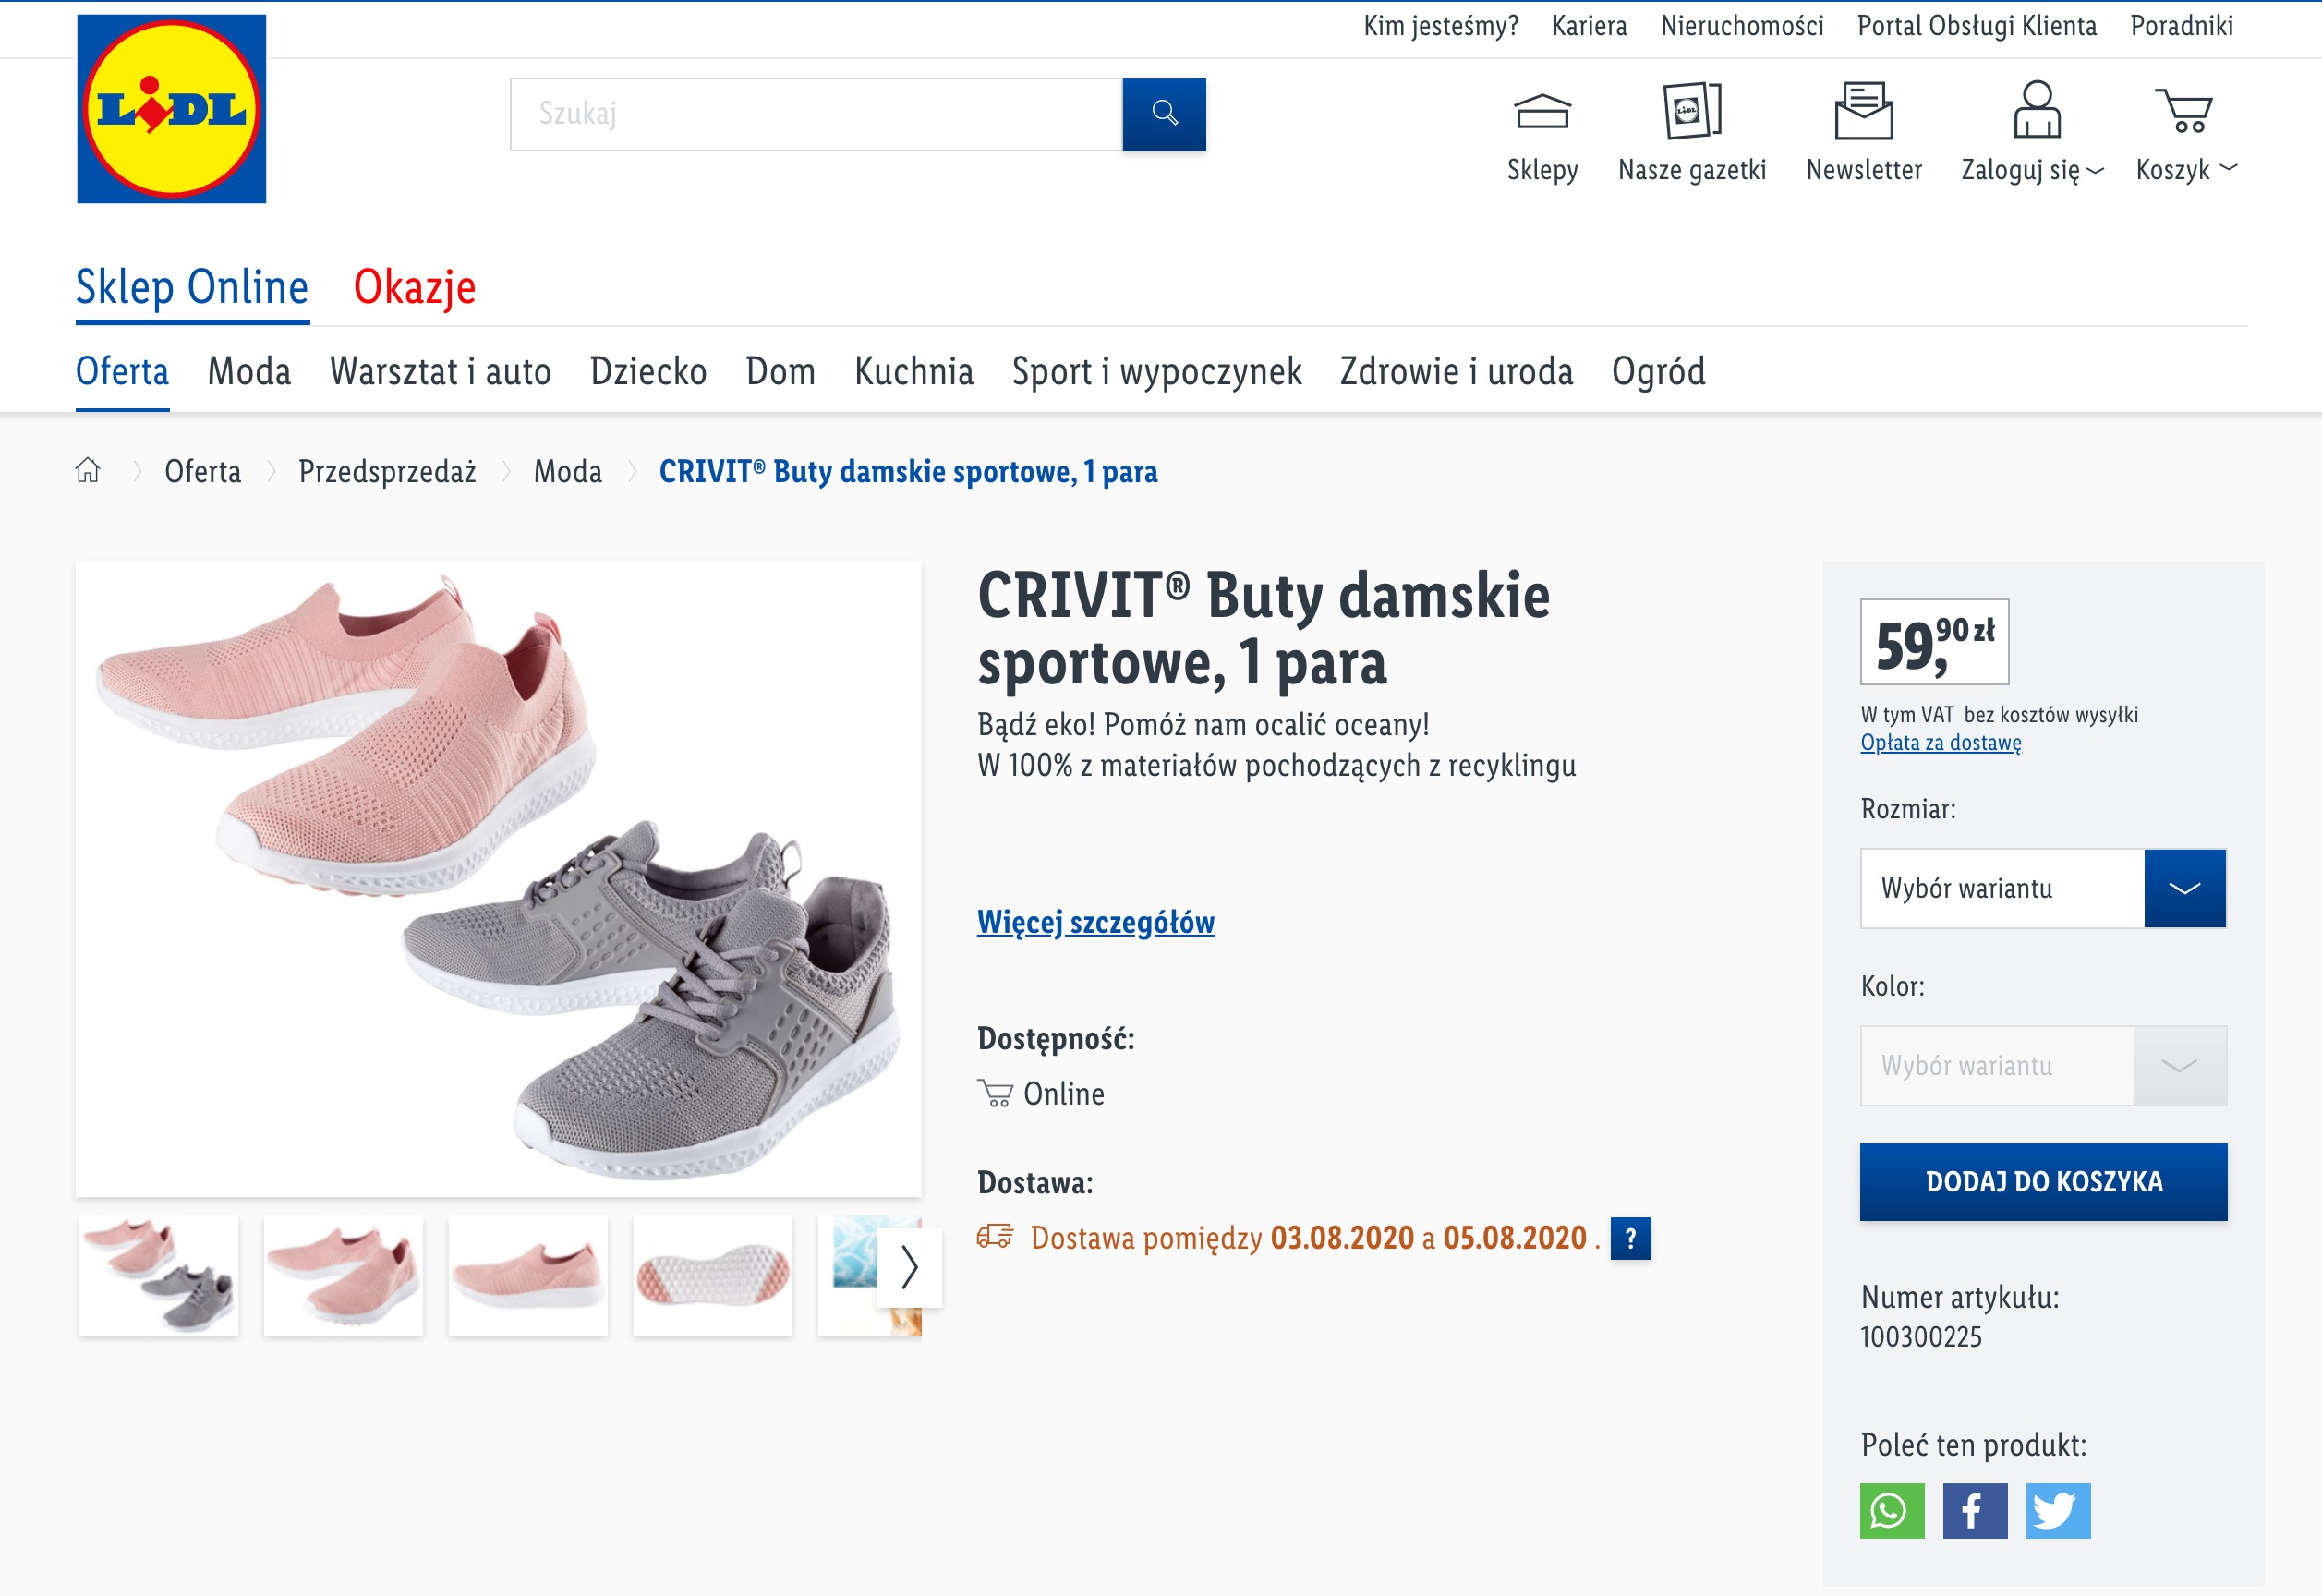 Recycled shoes to save the oceans. In Lidl you can buy footwear